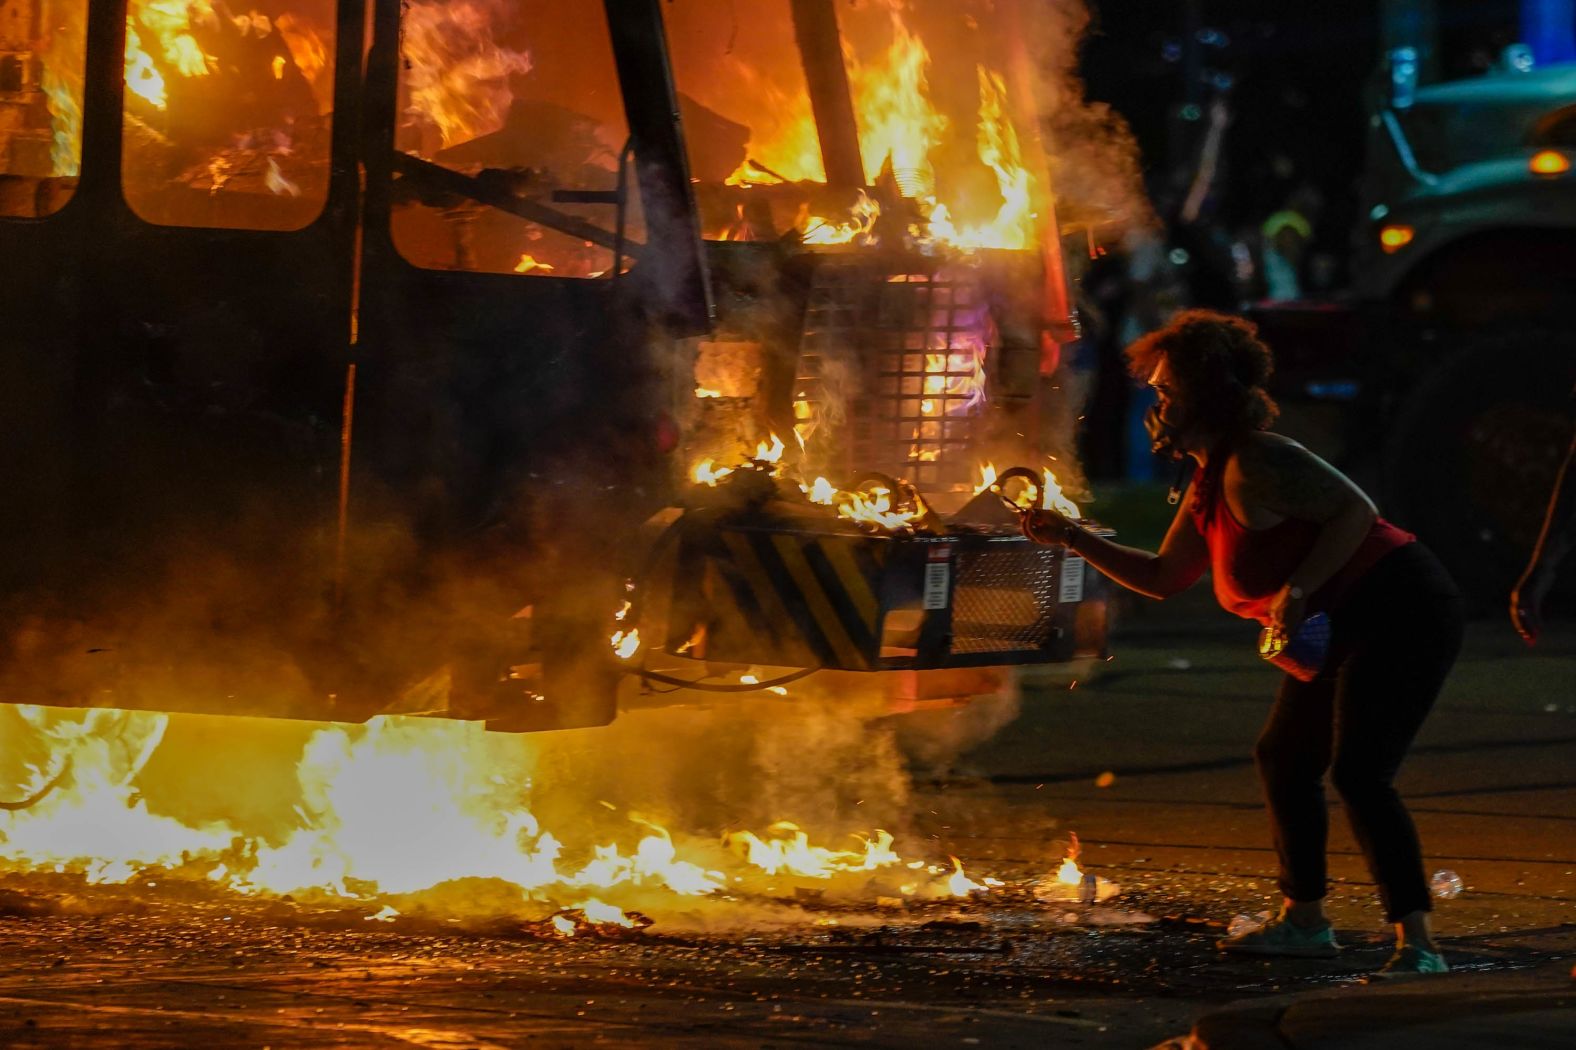 A protester lights a cigarette on a garbage truck that was set on fire during protests.